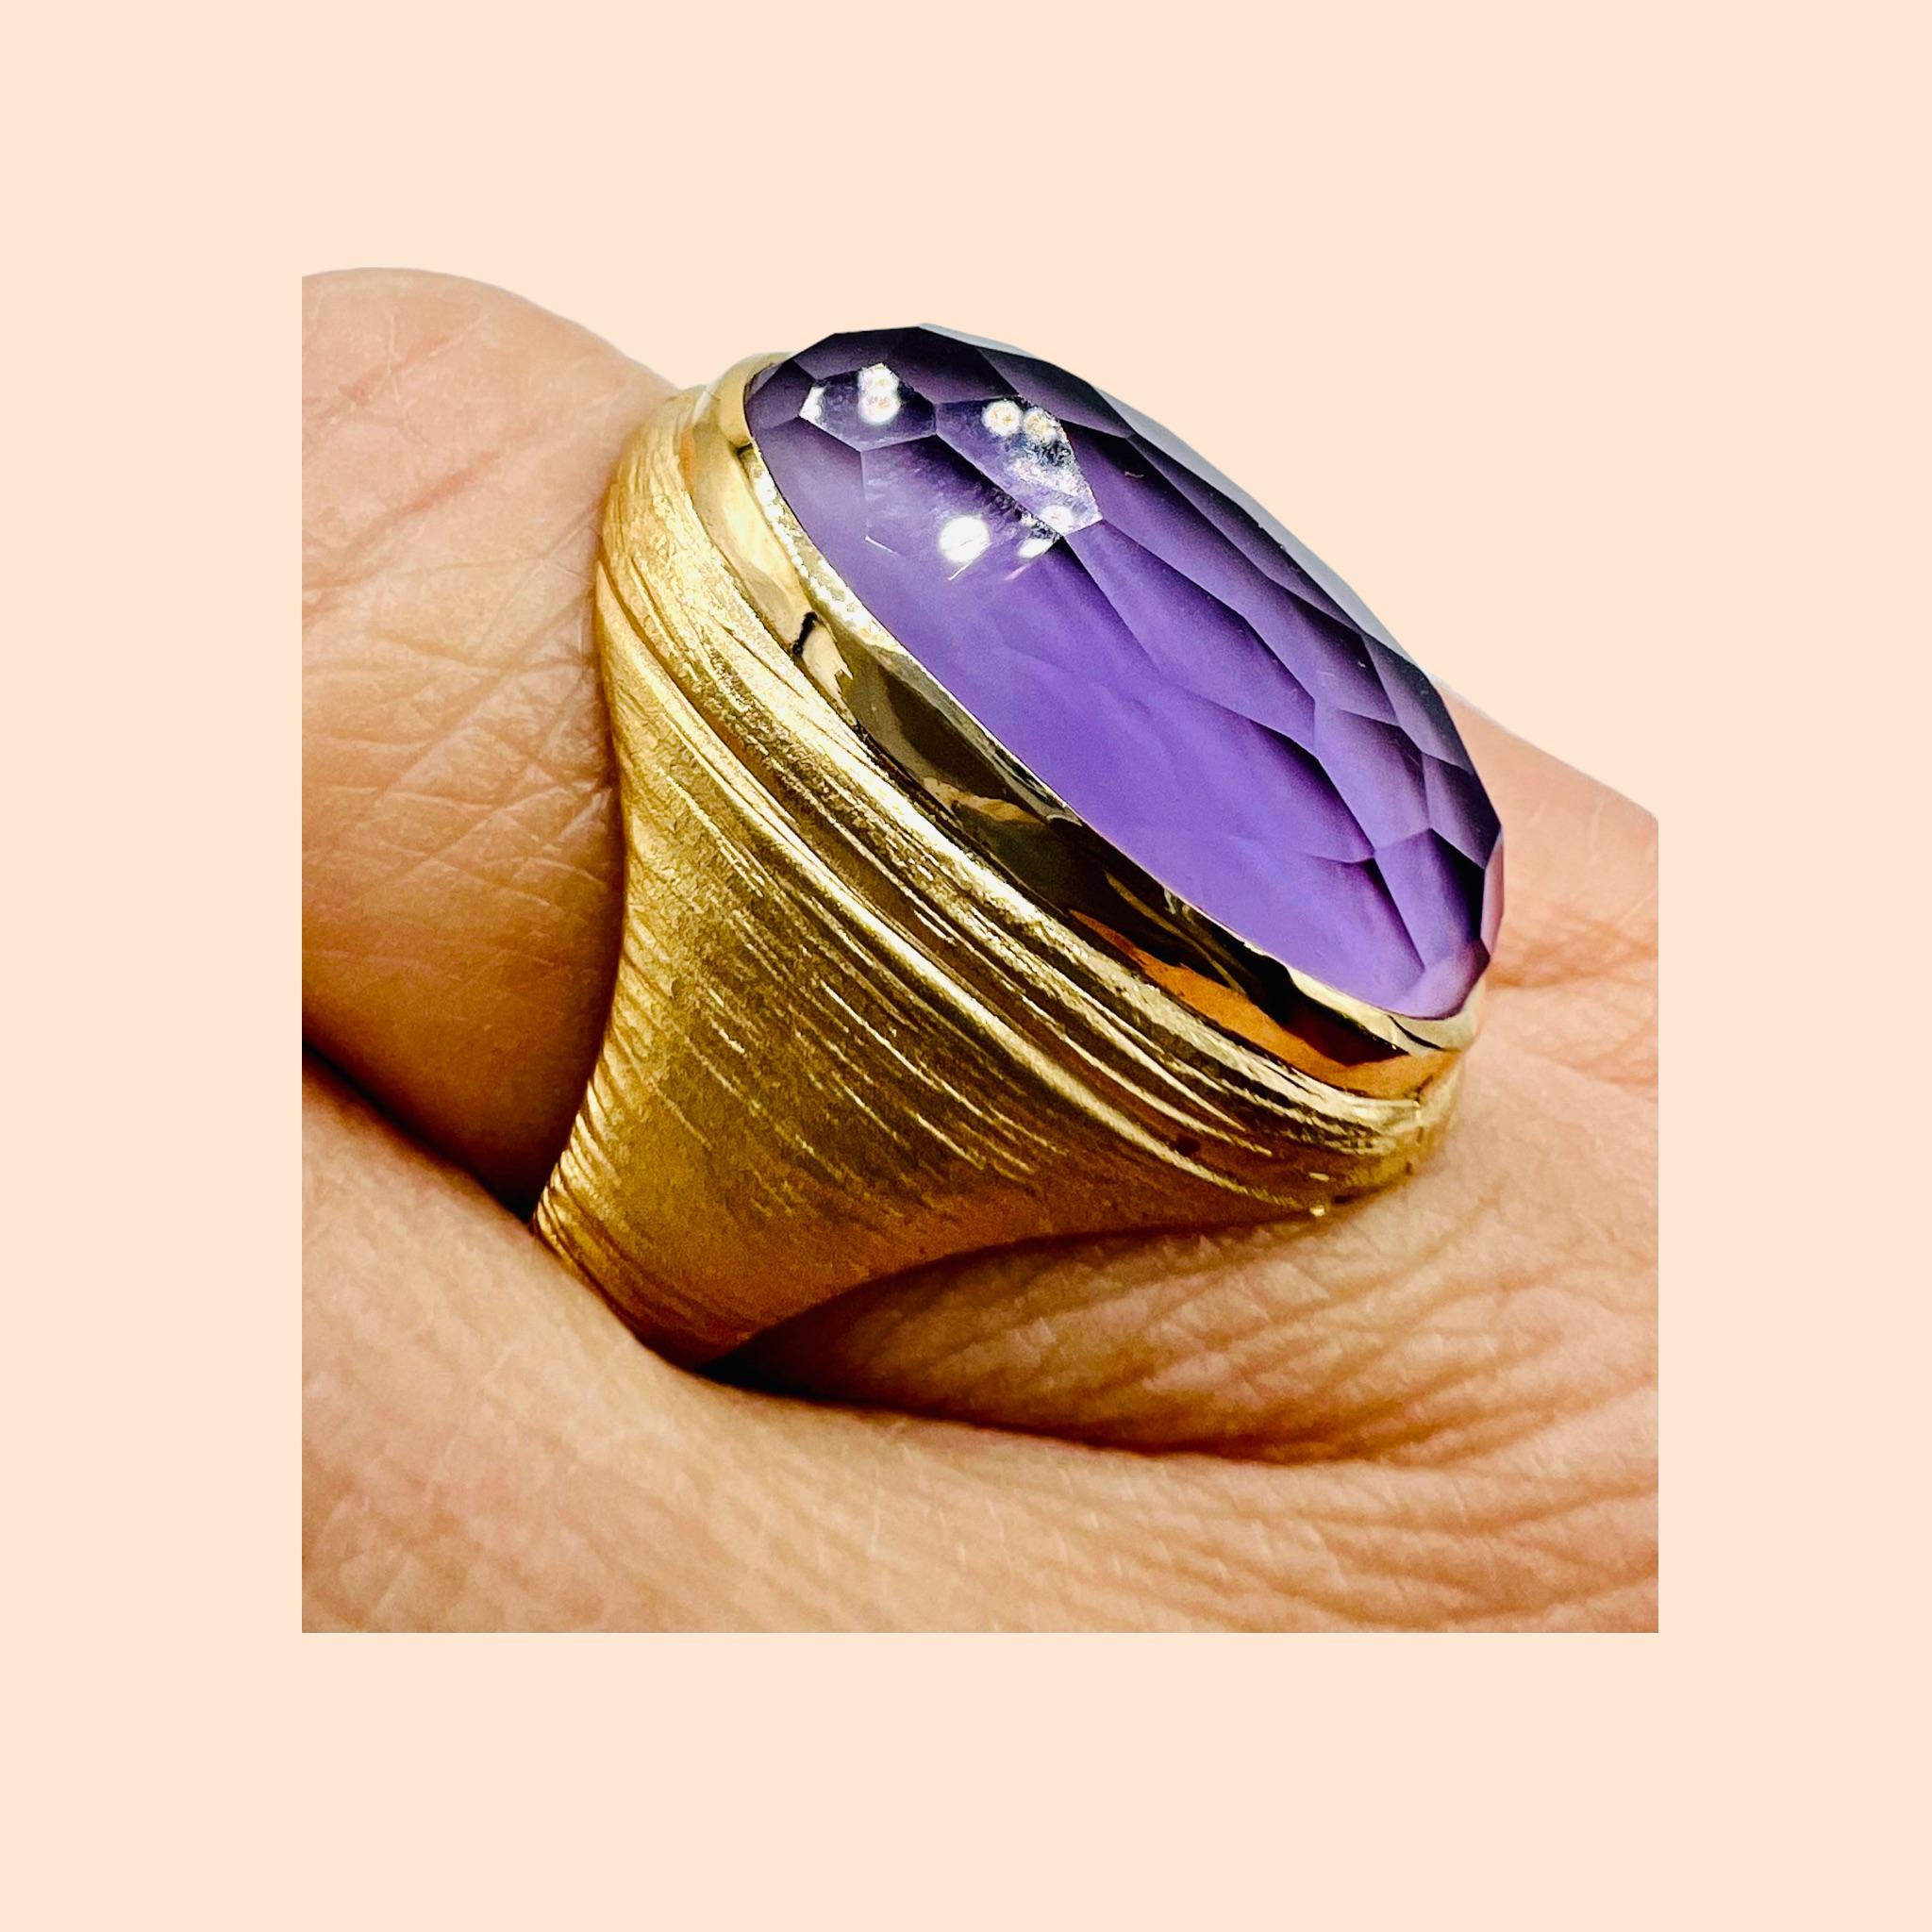 Important 18 carat gold ring set with a faceted amethyst, very luminous.
total weight: 11.09 grams
size 54 or 6.5
length of the stone: about 2.3 cm
width of the stone: about 1.5 cm
size reduction offered if necessary.